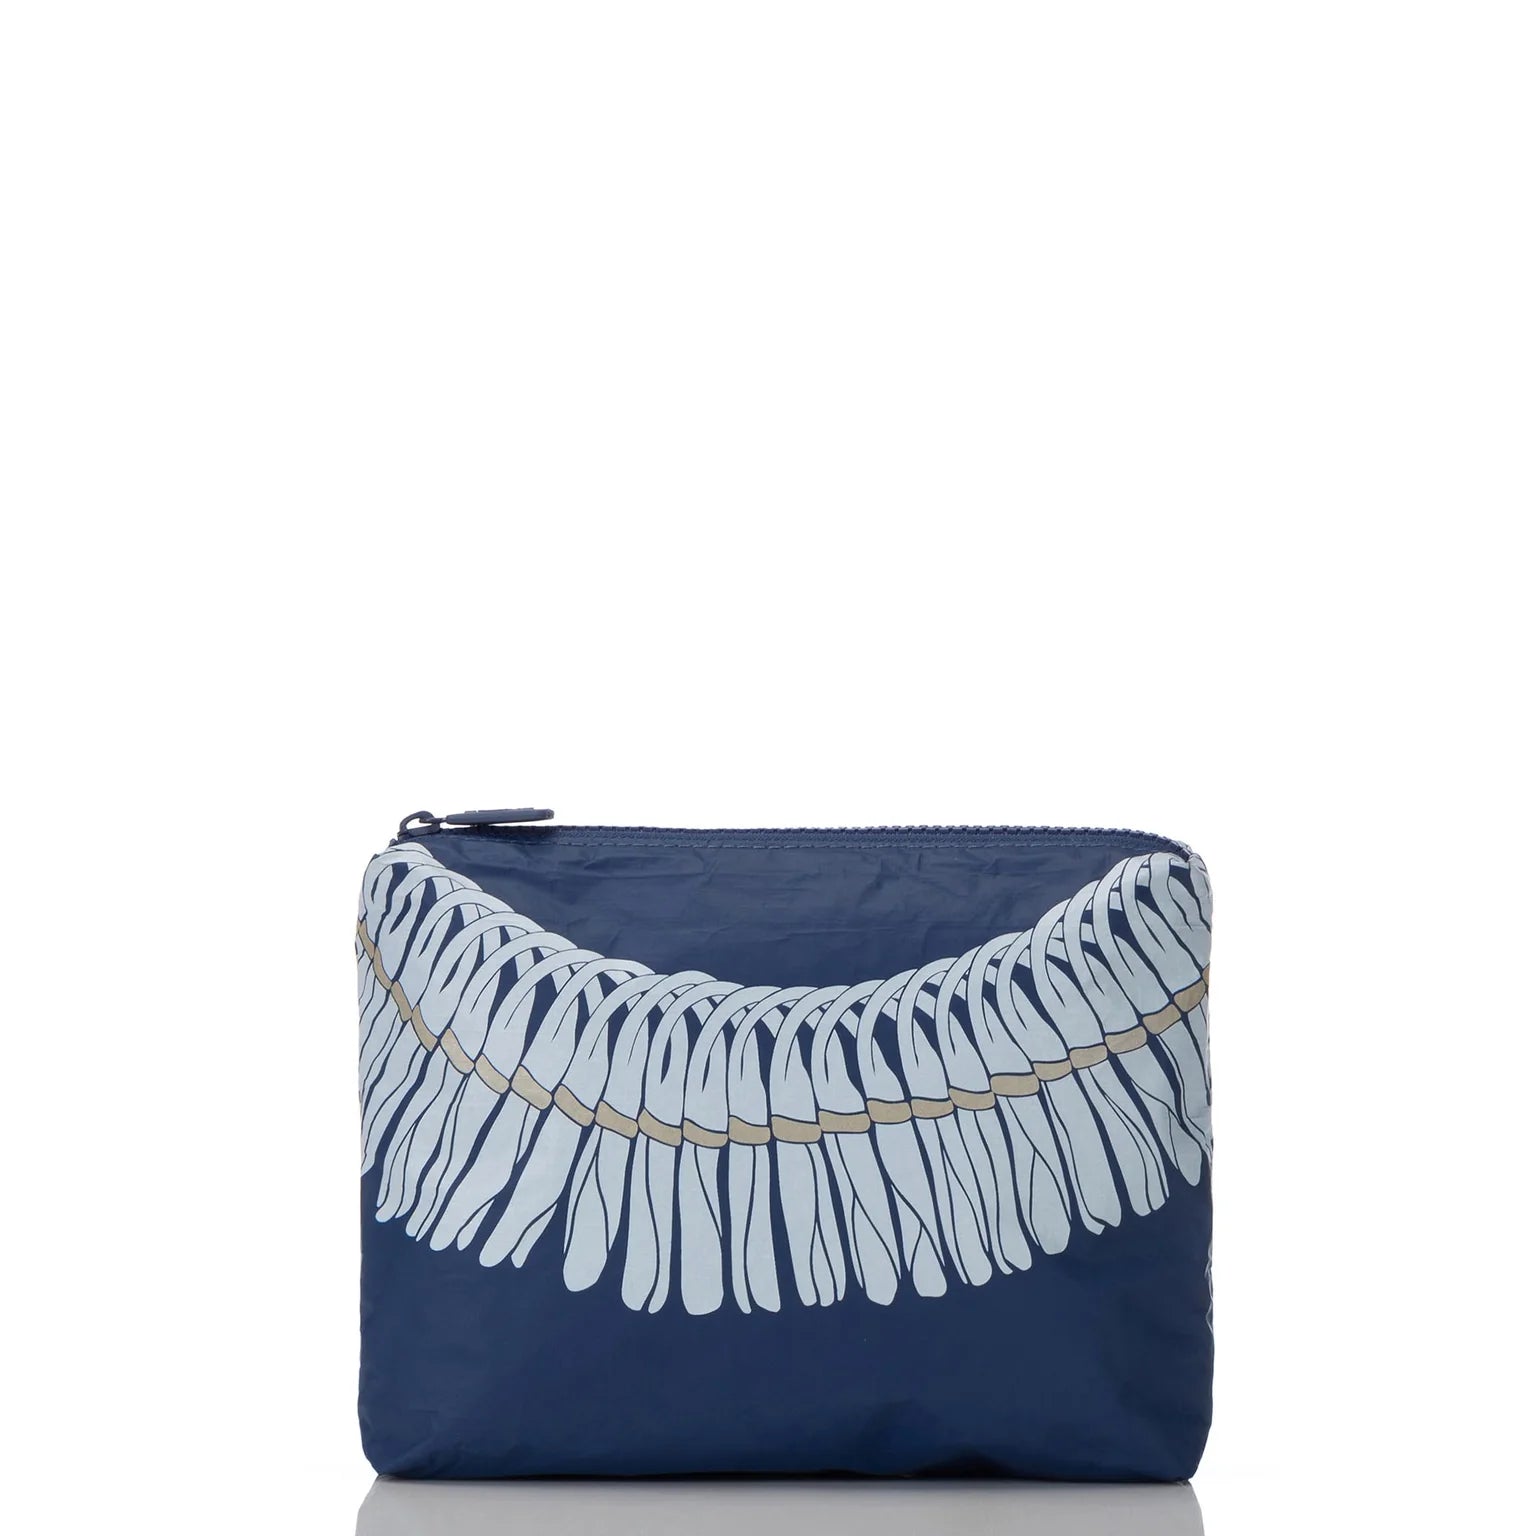 Ginger Lei Small Pouch / Hanalei Moon Navy